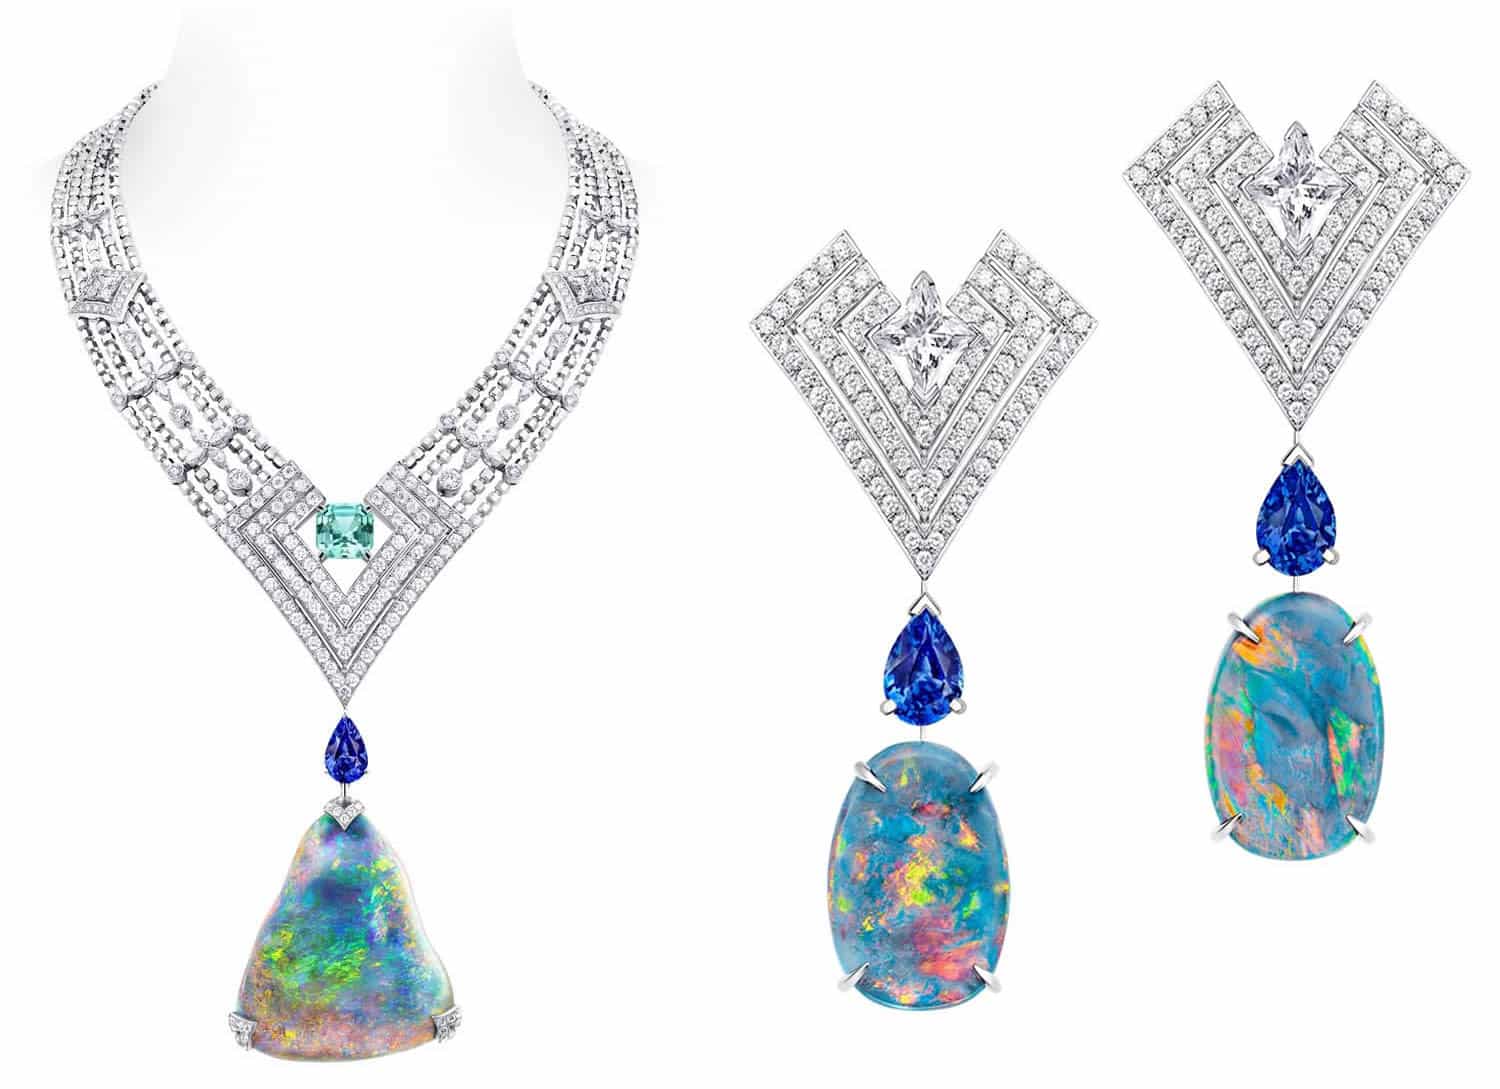 Louis-Vuitton-Acte-V-Jewelry-Collection 1